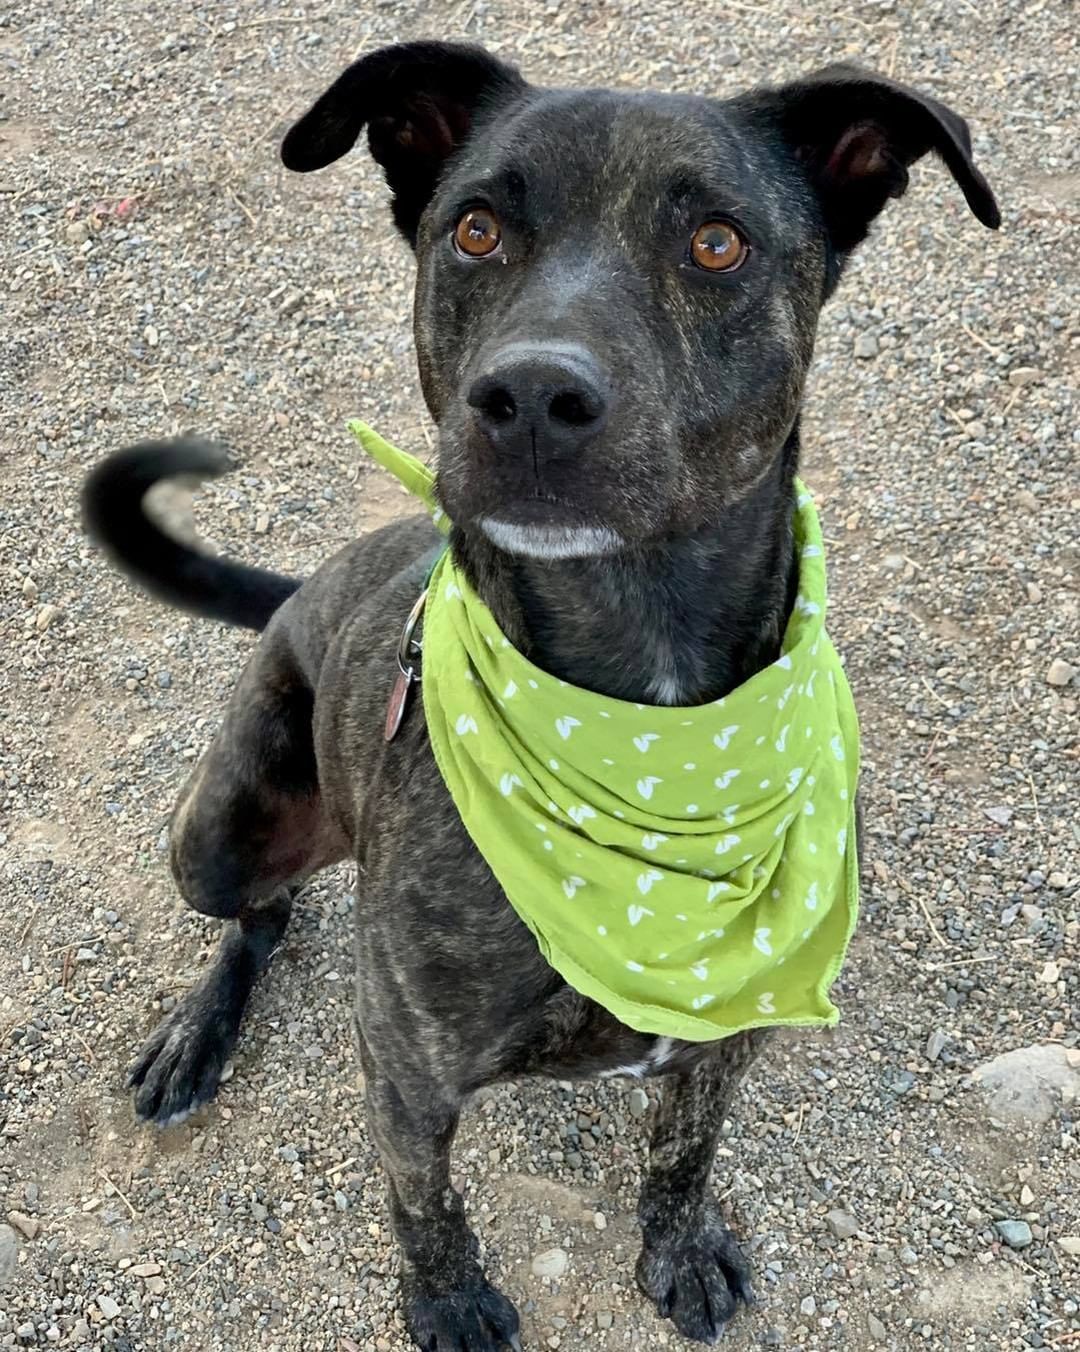 Today we want to highlight a staff favorite, Chewy! This friendly, goofy, outgoing and affectionate 4 year old has been with us for over 80 days and is more than ready to find his forever family. 

Chewy is a good listener, knows basic commands and is awesome on a leash! He enjoys spending time with gentle dogs but is more interested in the people around him. Chewy loves everyone he meets and adores kiddos.

Chewy is looking for an active home that will take him on daily walks and weekend outdoor adventures. This smart, lovable guy needs an affectionate home that understands his enthusiasm for life and I’ve for adventures ♥️

Interested in adopting Chewy? Apply online today and a team member will call you to set up a time for you to meet this kindhearted guy!

<a target='_blank' href='https://www.instagram.com/explore/tags/lpchs/'>#lpchs</a> <a target='_blank' href='https://www.instagram.com/explore/tags/adoptashelterpet/'>#adoptashelterpet</a> <a target='_blank' href='https://www.instagram.com/explore/tags/homefortheholidays/'>#homefortheholidays</a> <a target='_blank' href='https://www.instagram.com/explore/tags/pittienation/'>#pittienation</a> <a target='_blank' href='https://www.instagram.com/explore/tags/adoptlocal/'>#adoptlocal</a>